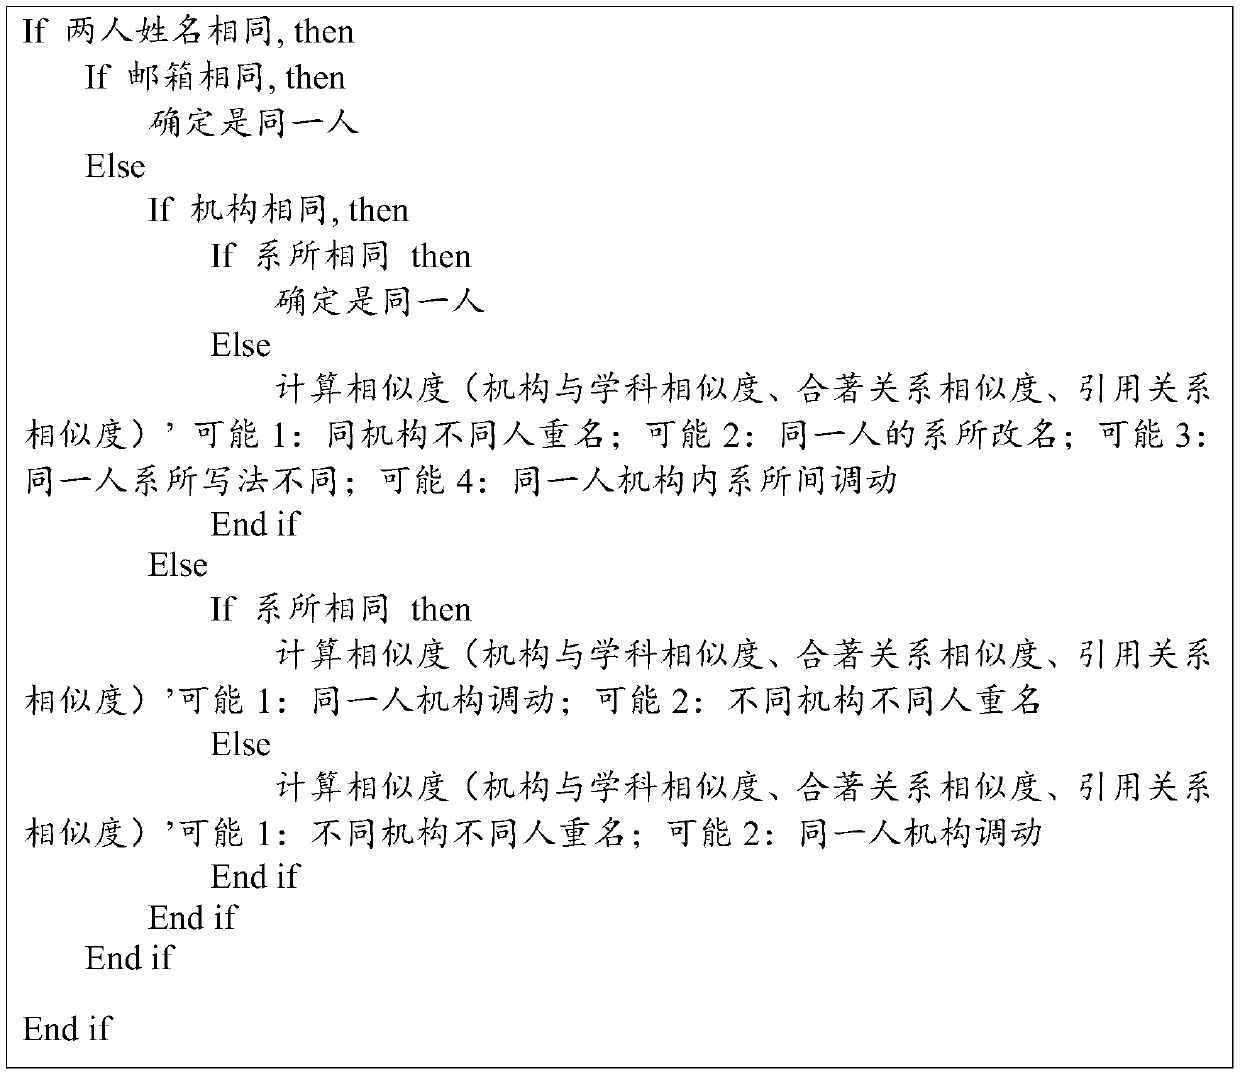 A Name Disambiguation Method for Chinese Authors in English Documents